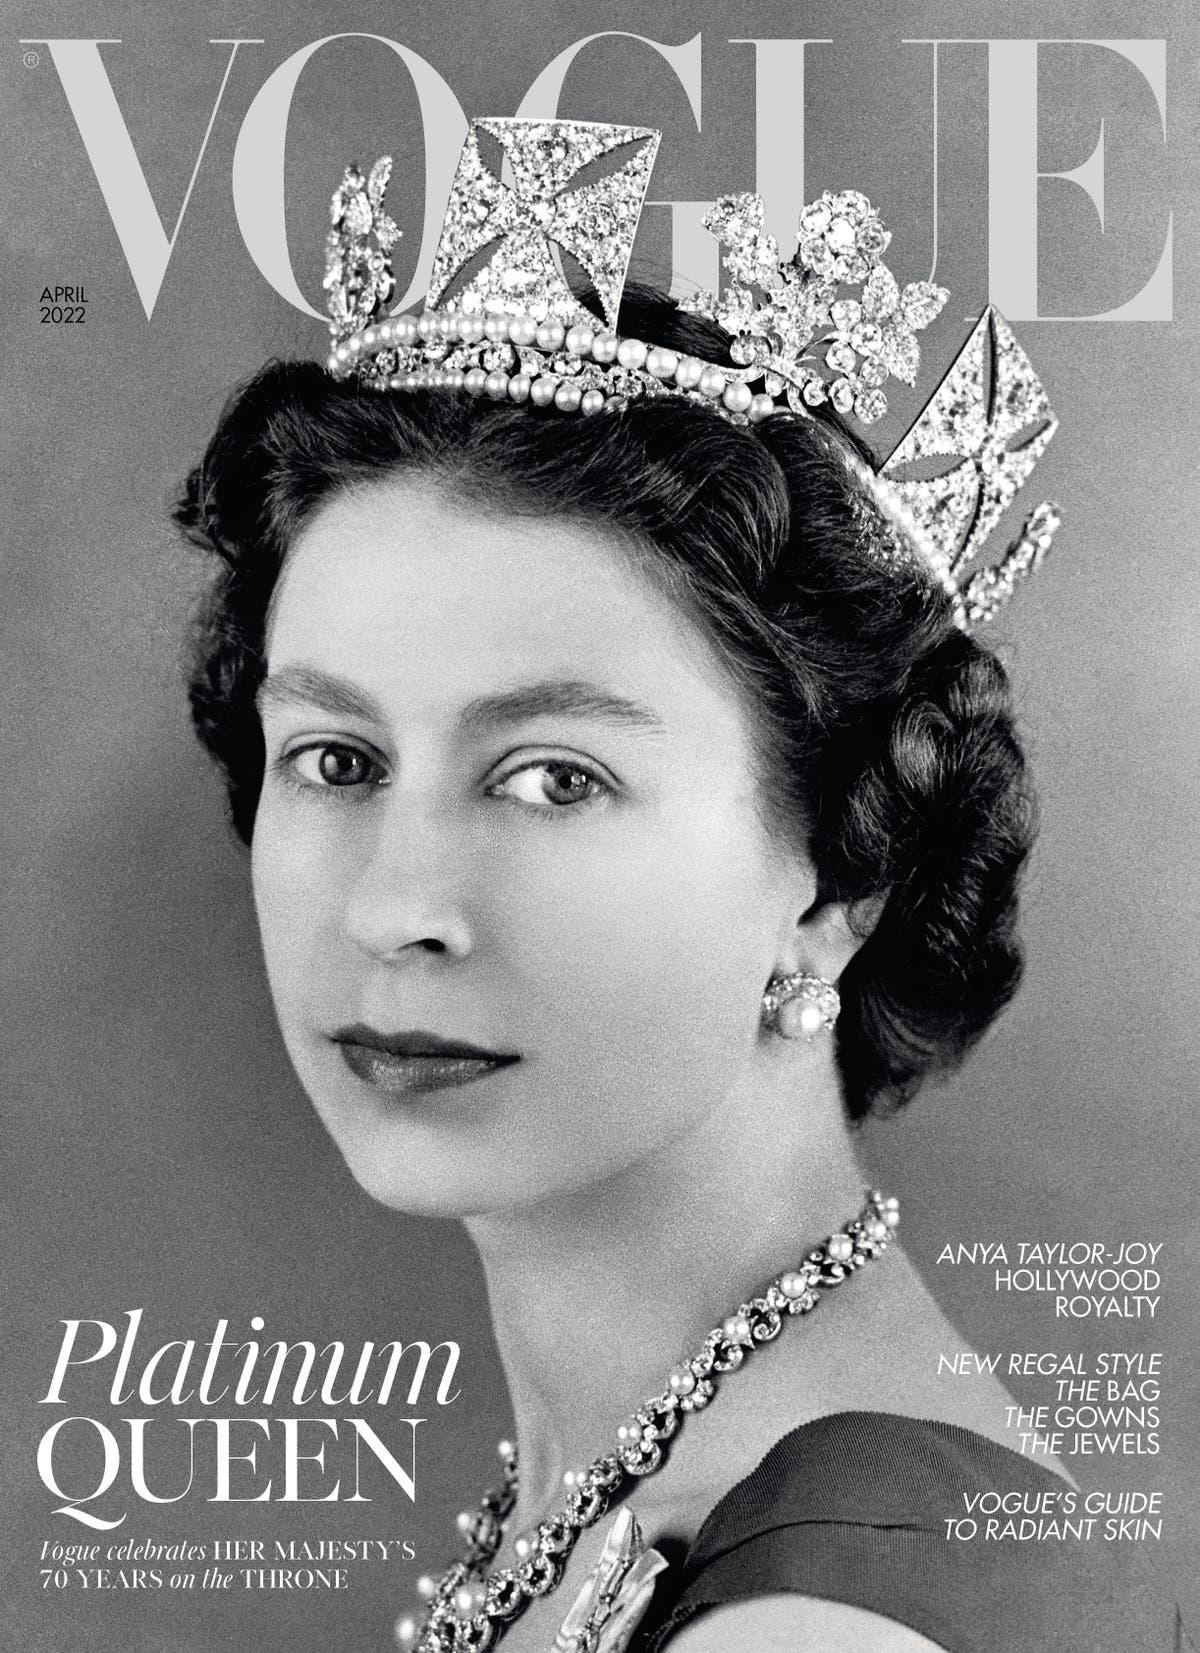 The Queen to feature on British Vogue cover in Platinum Jubilee special